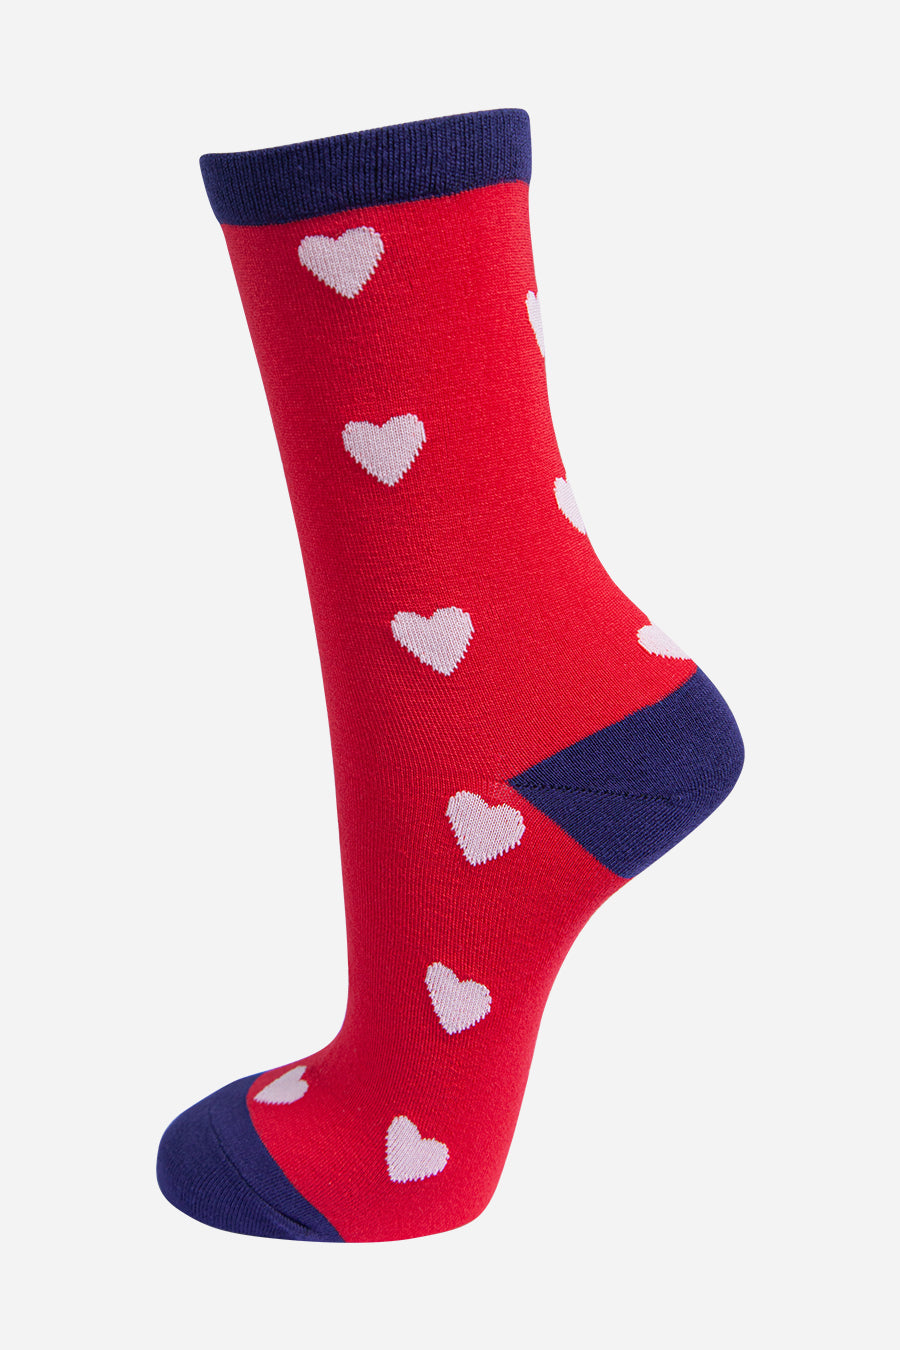 red bamboo socks with a navy blue heel, toe and cuff with an all over pink love heart pattern